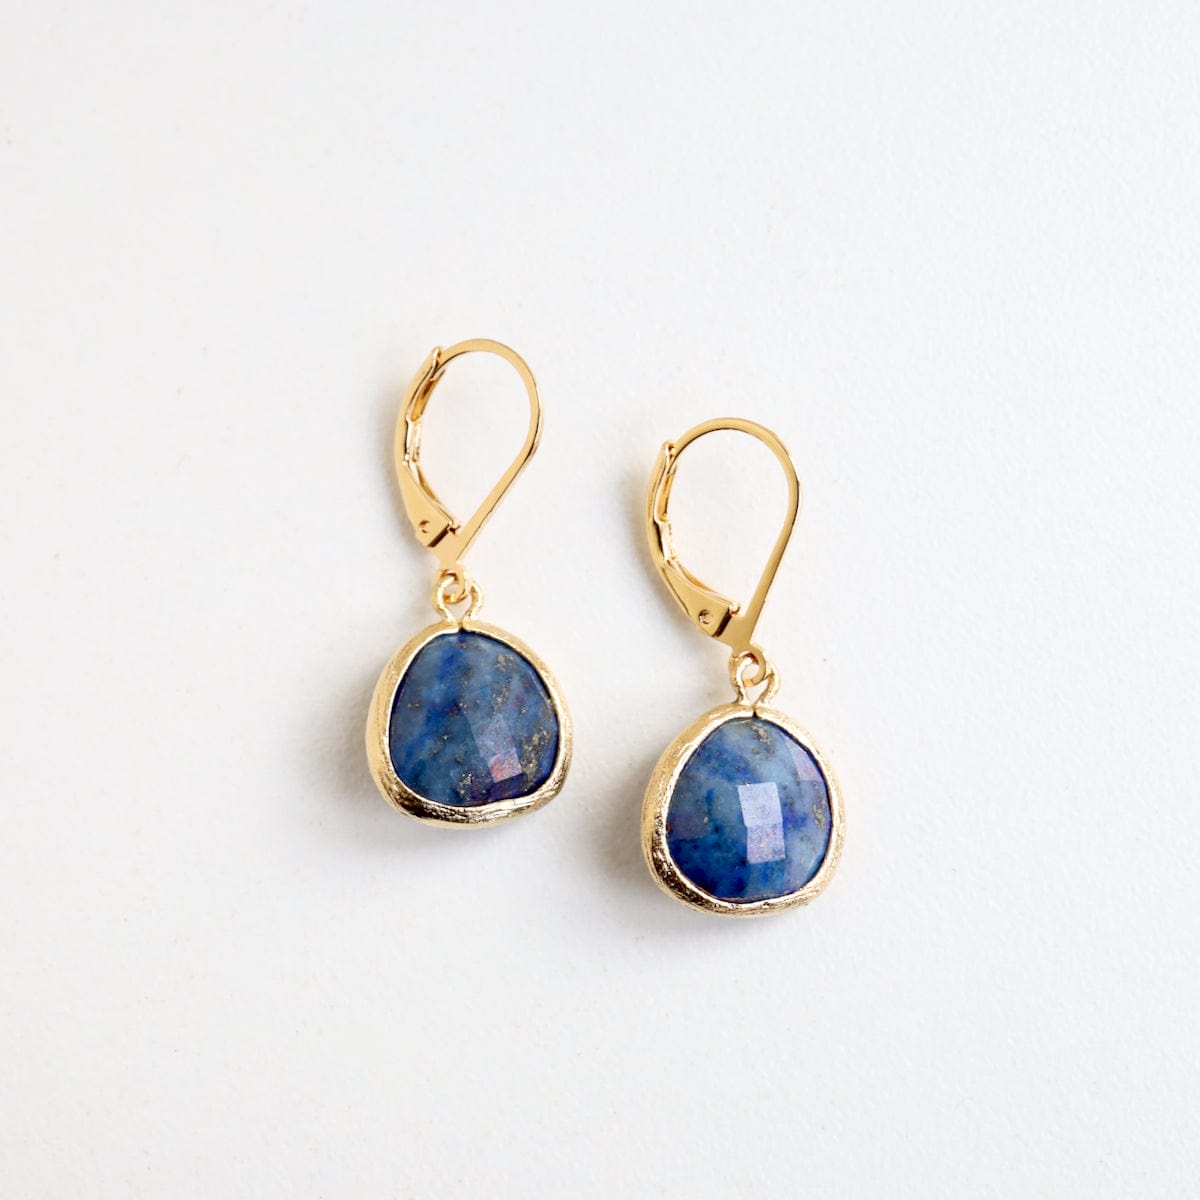 EAR-GPL Gold Plated Lapis Lever Back Earring